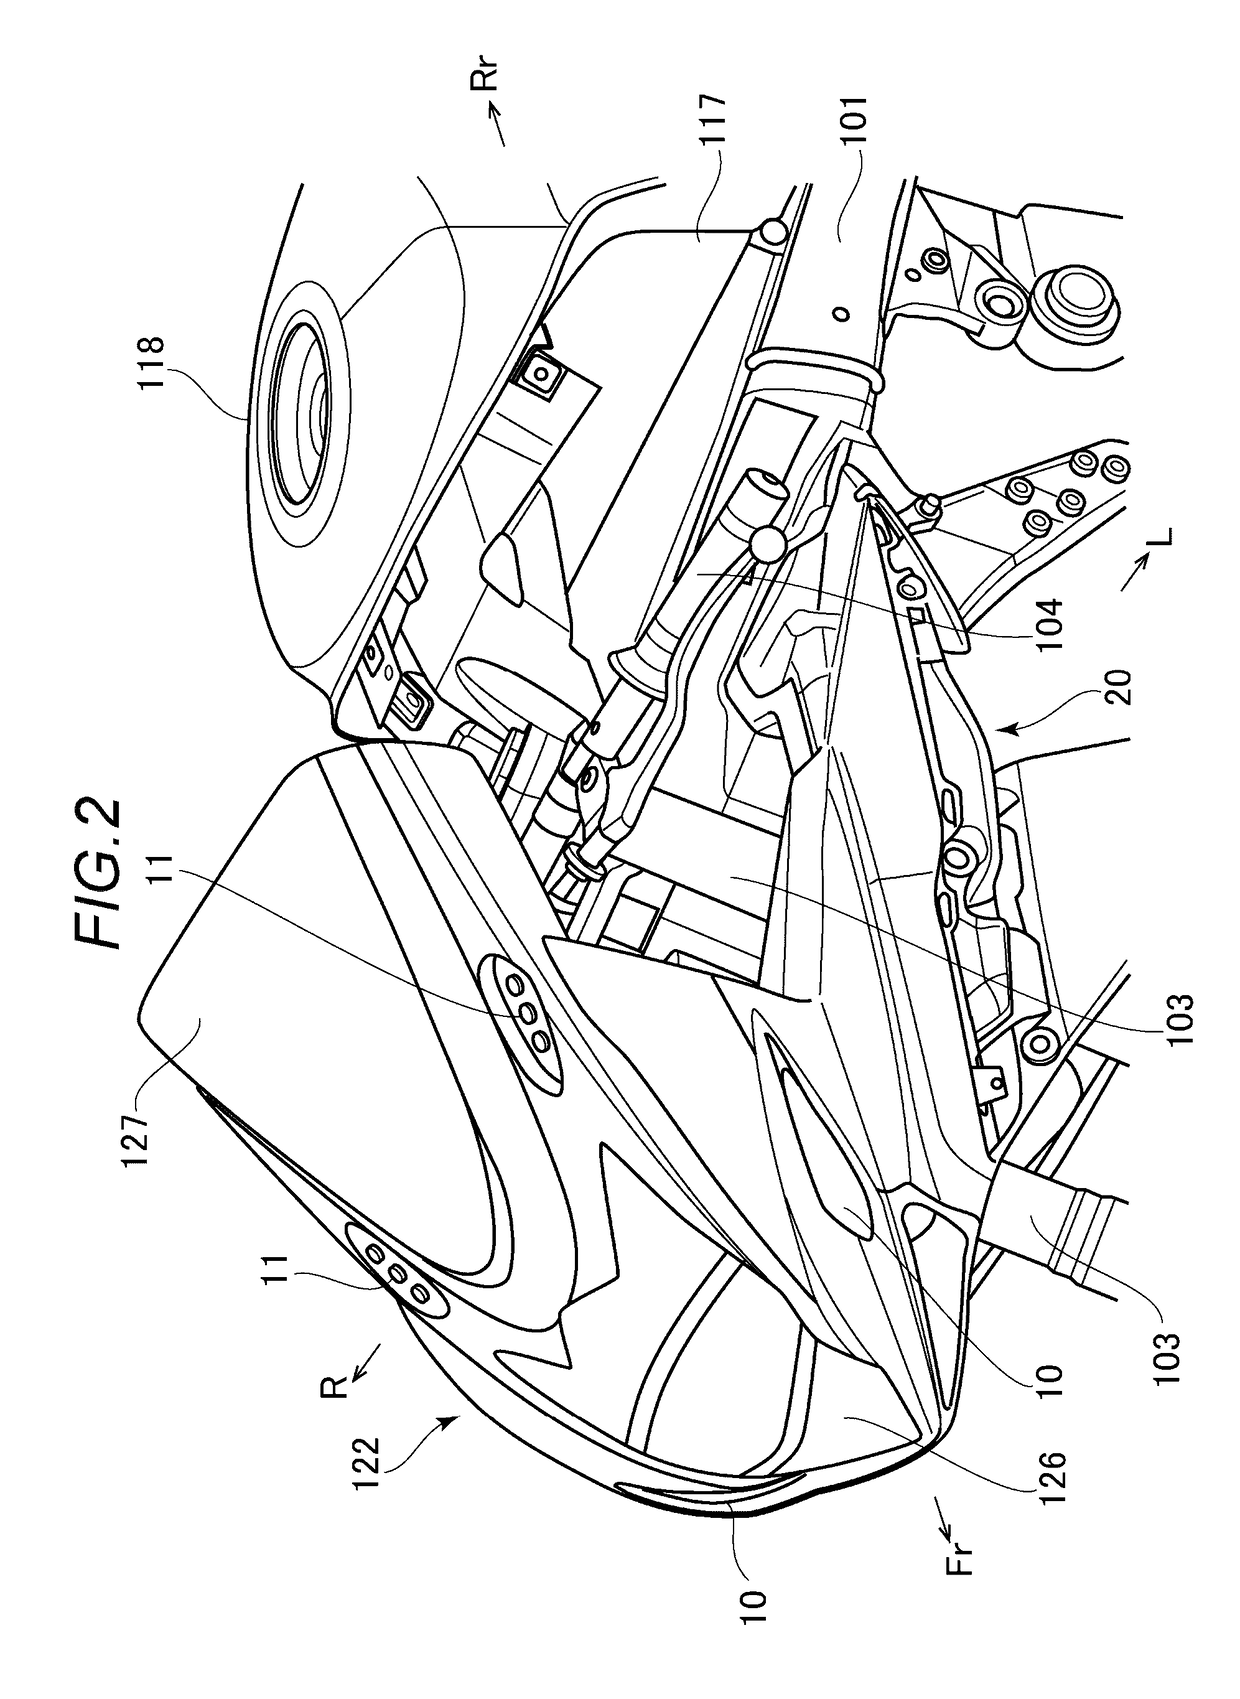 Air intake structure for saddle-ride type vehicle